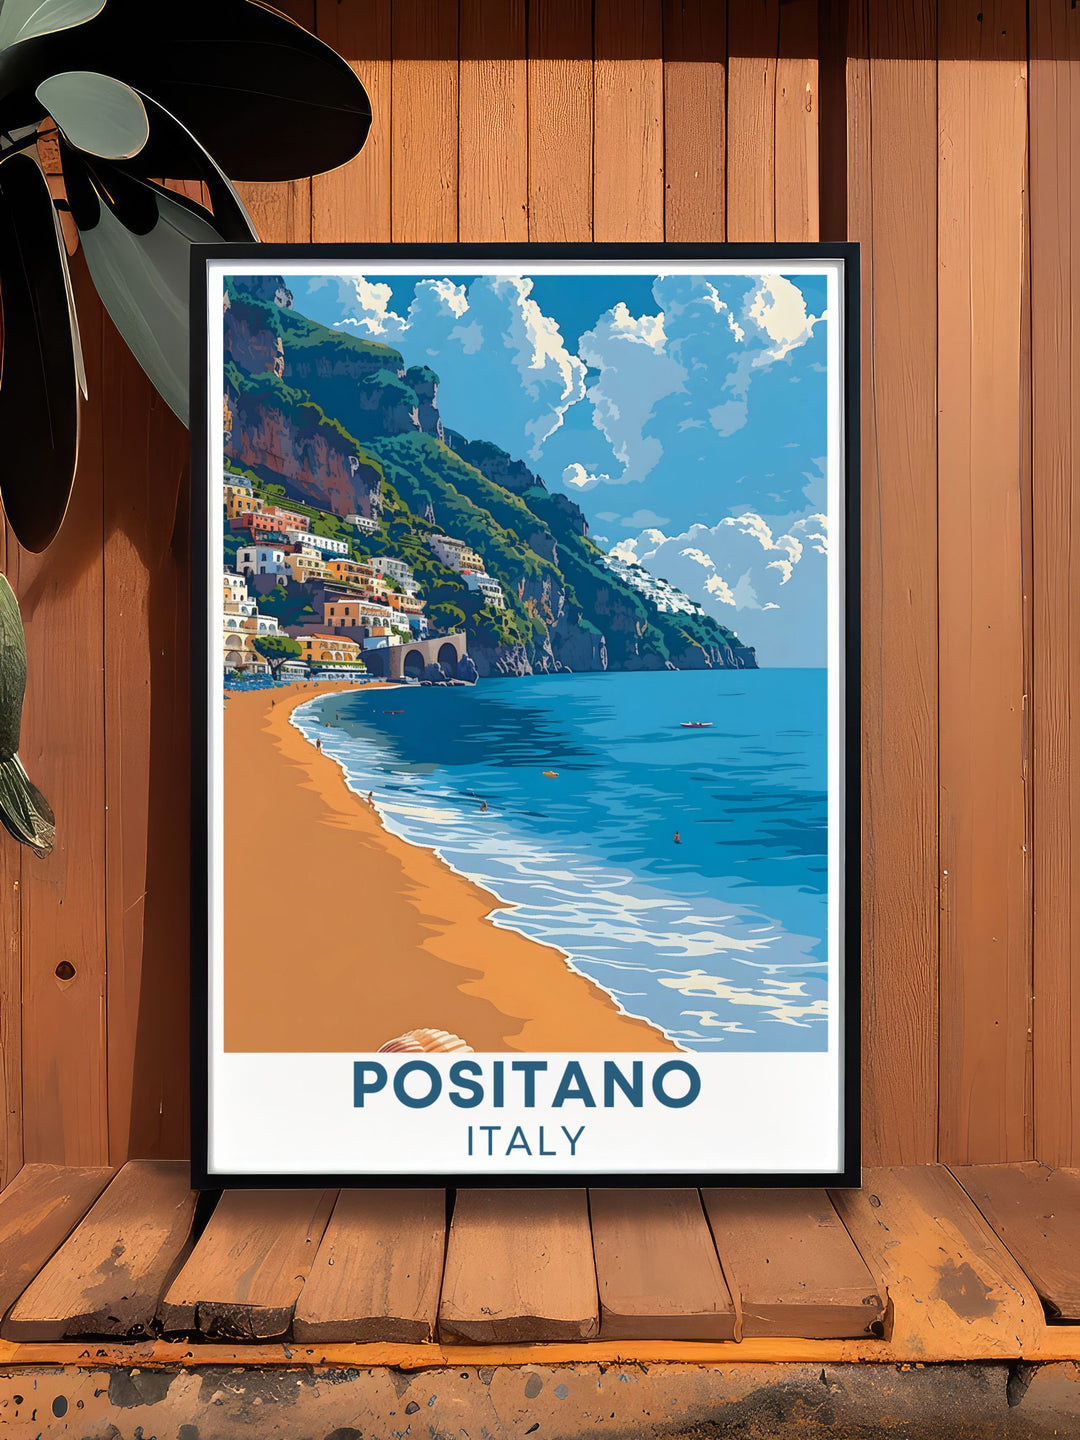 Spiaggia Grande Poster featuring Positanos iconic beach a beautiful piece of Italy wall art perfect for home decor adding a touch of Mediterranean charm to any room ideal for those who love the Amalfi Coast and want to bring a piece of it home